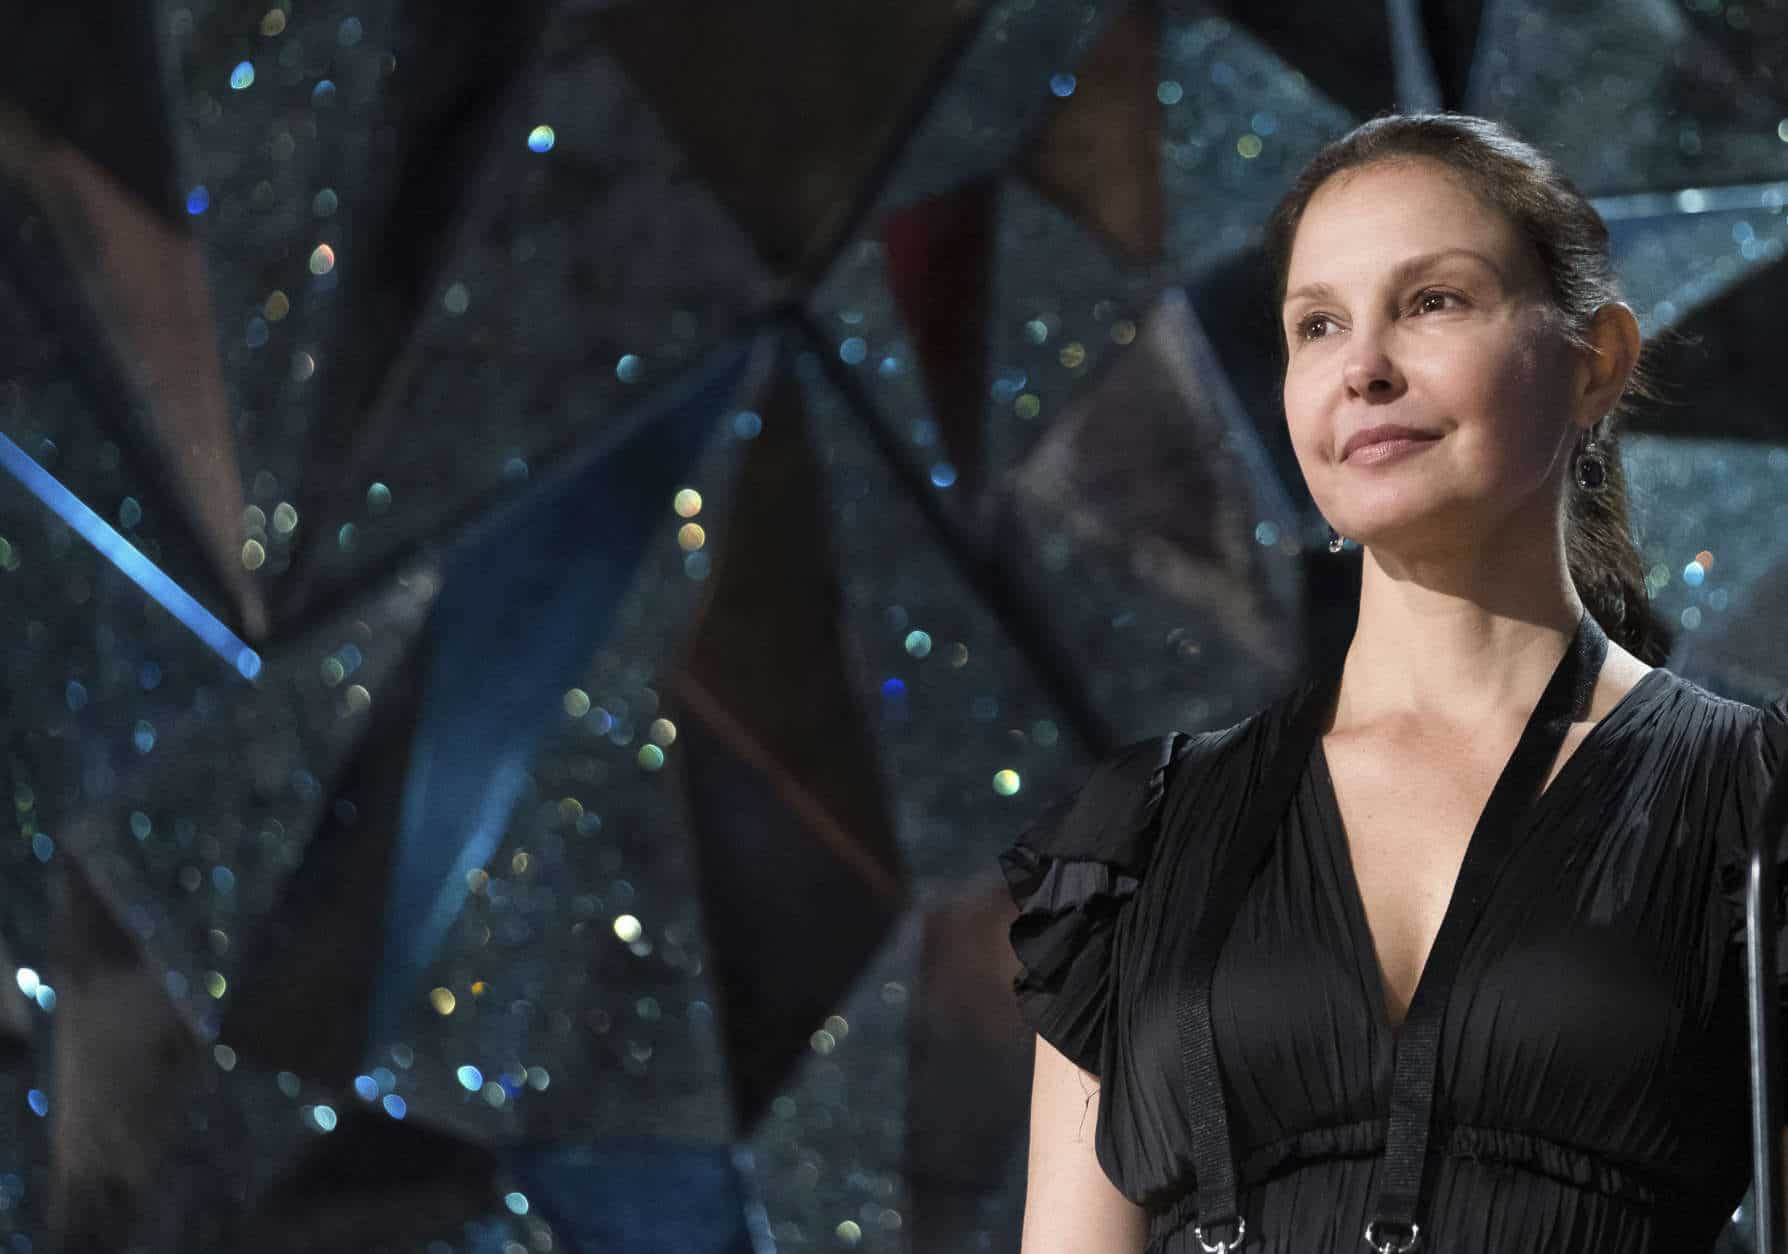 Ashley Judd appears during rehearsals for the 90th Academy Awards in Los Angeles on Saturday, March 3, 2018. The Academy Awards will be held at the Dolby Theatre on Sunday, March 4. (Photo by Charles Sykes/Invision/AP)